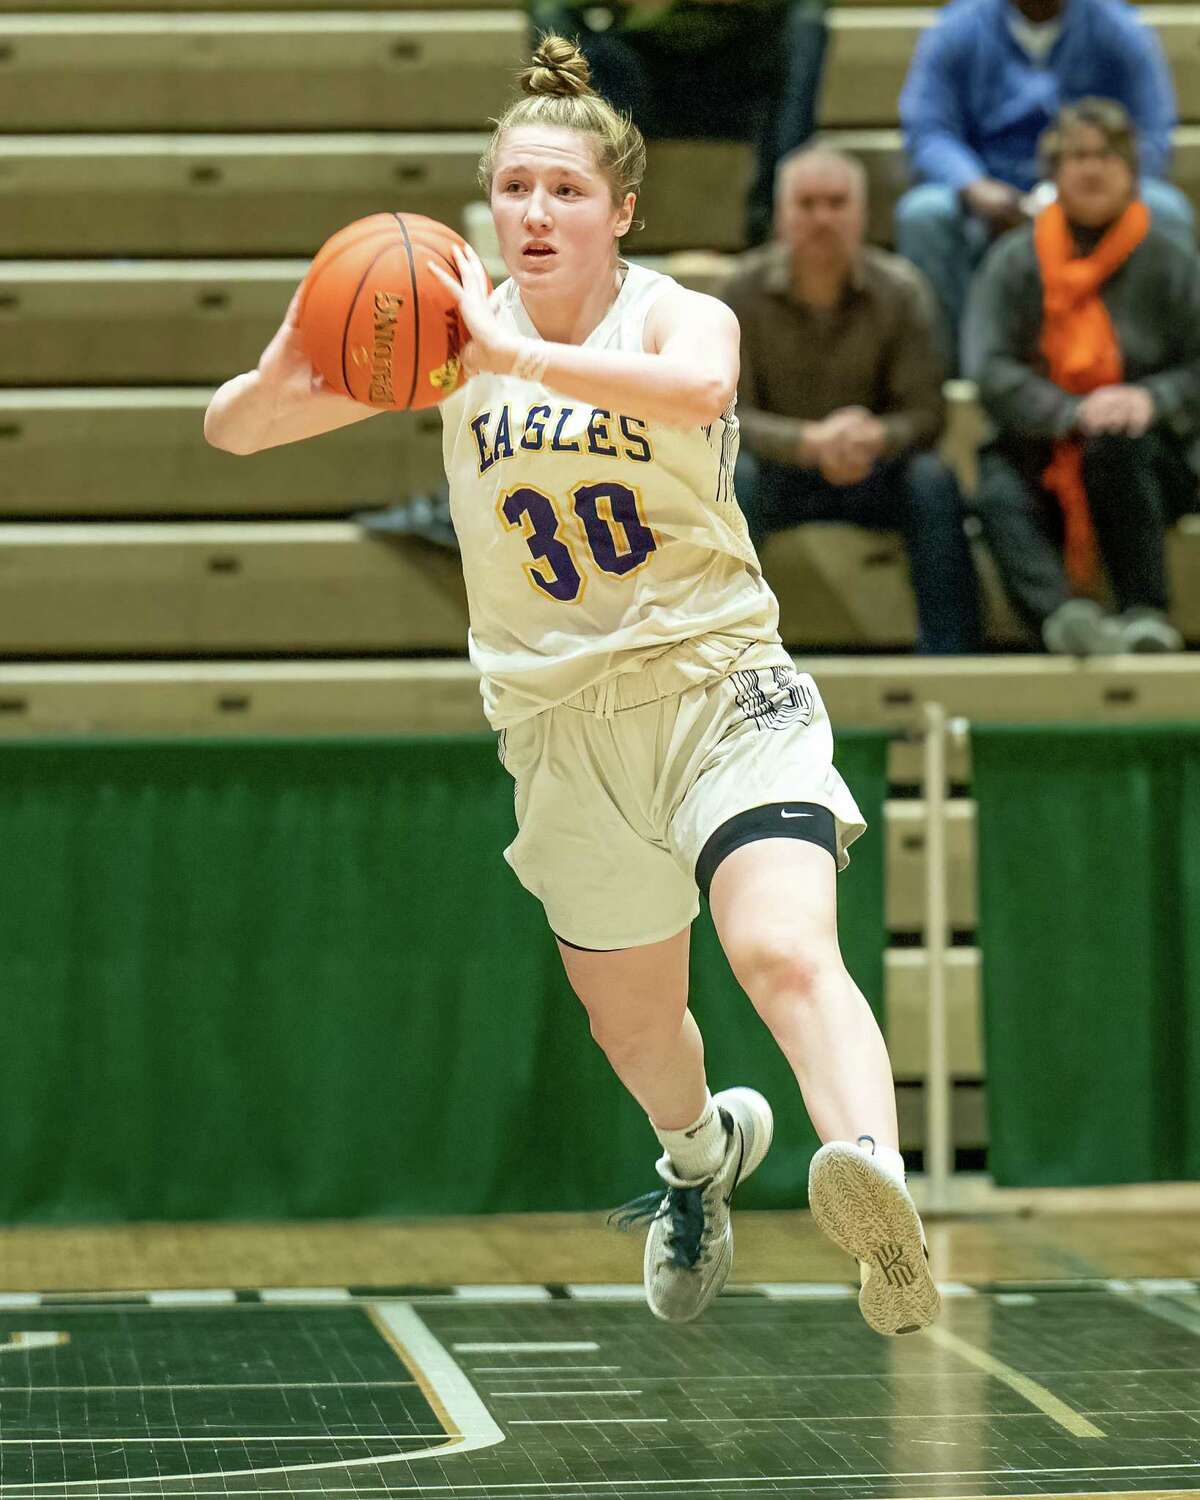 Duanesburg sophomore Allison O’Hanlon starts a fast break during the state Class C quarterfinals against Northern Adirondack at Hudson Valley Community College in Troy, NY, on Sunday, March 13, 2022. (Jim Franco/Special to the Times union)